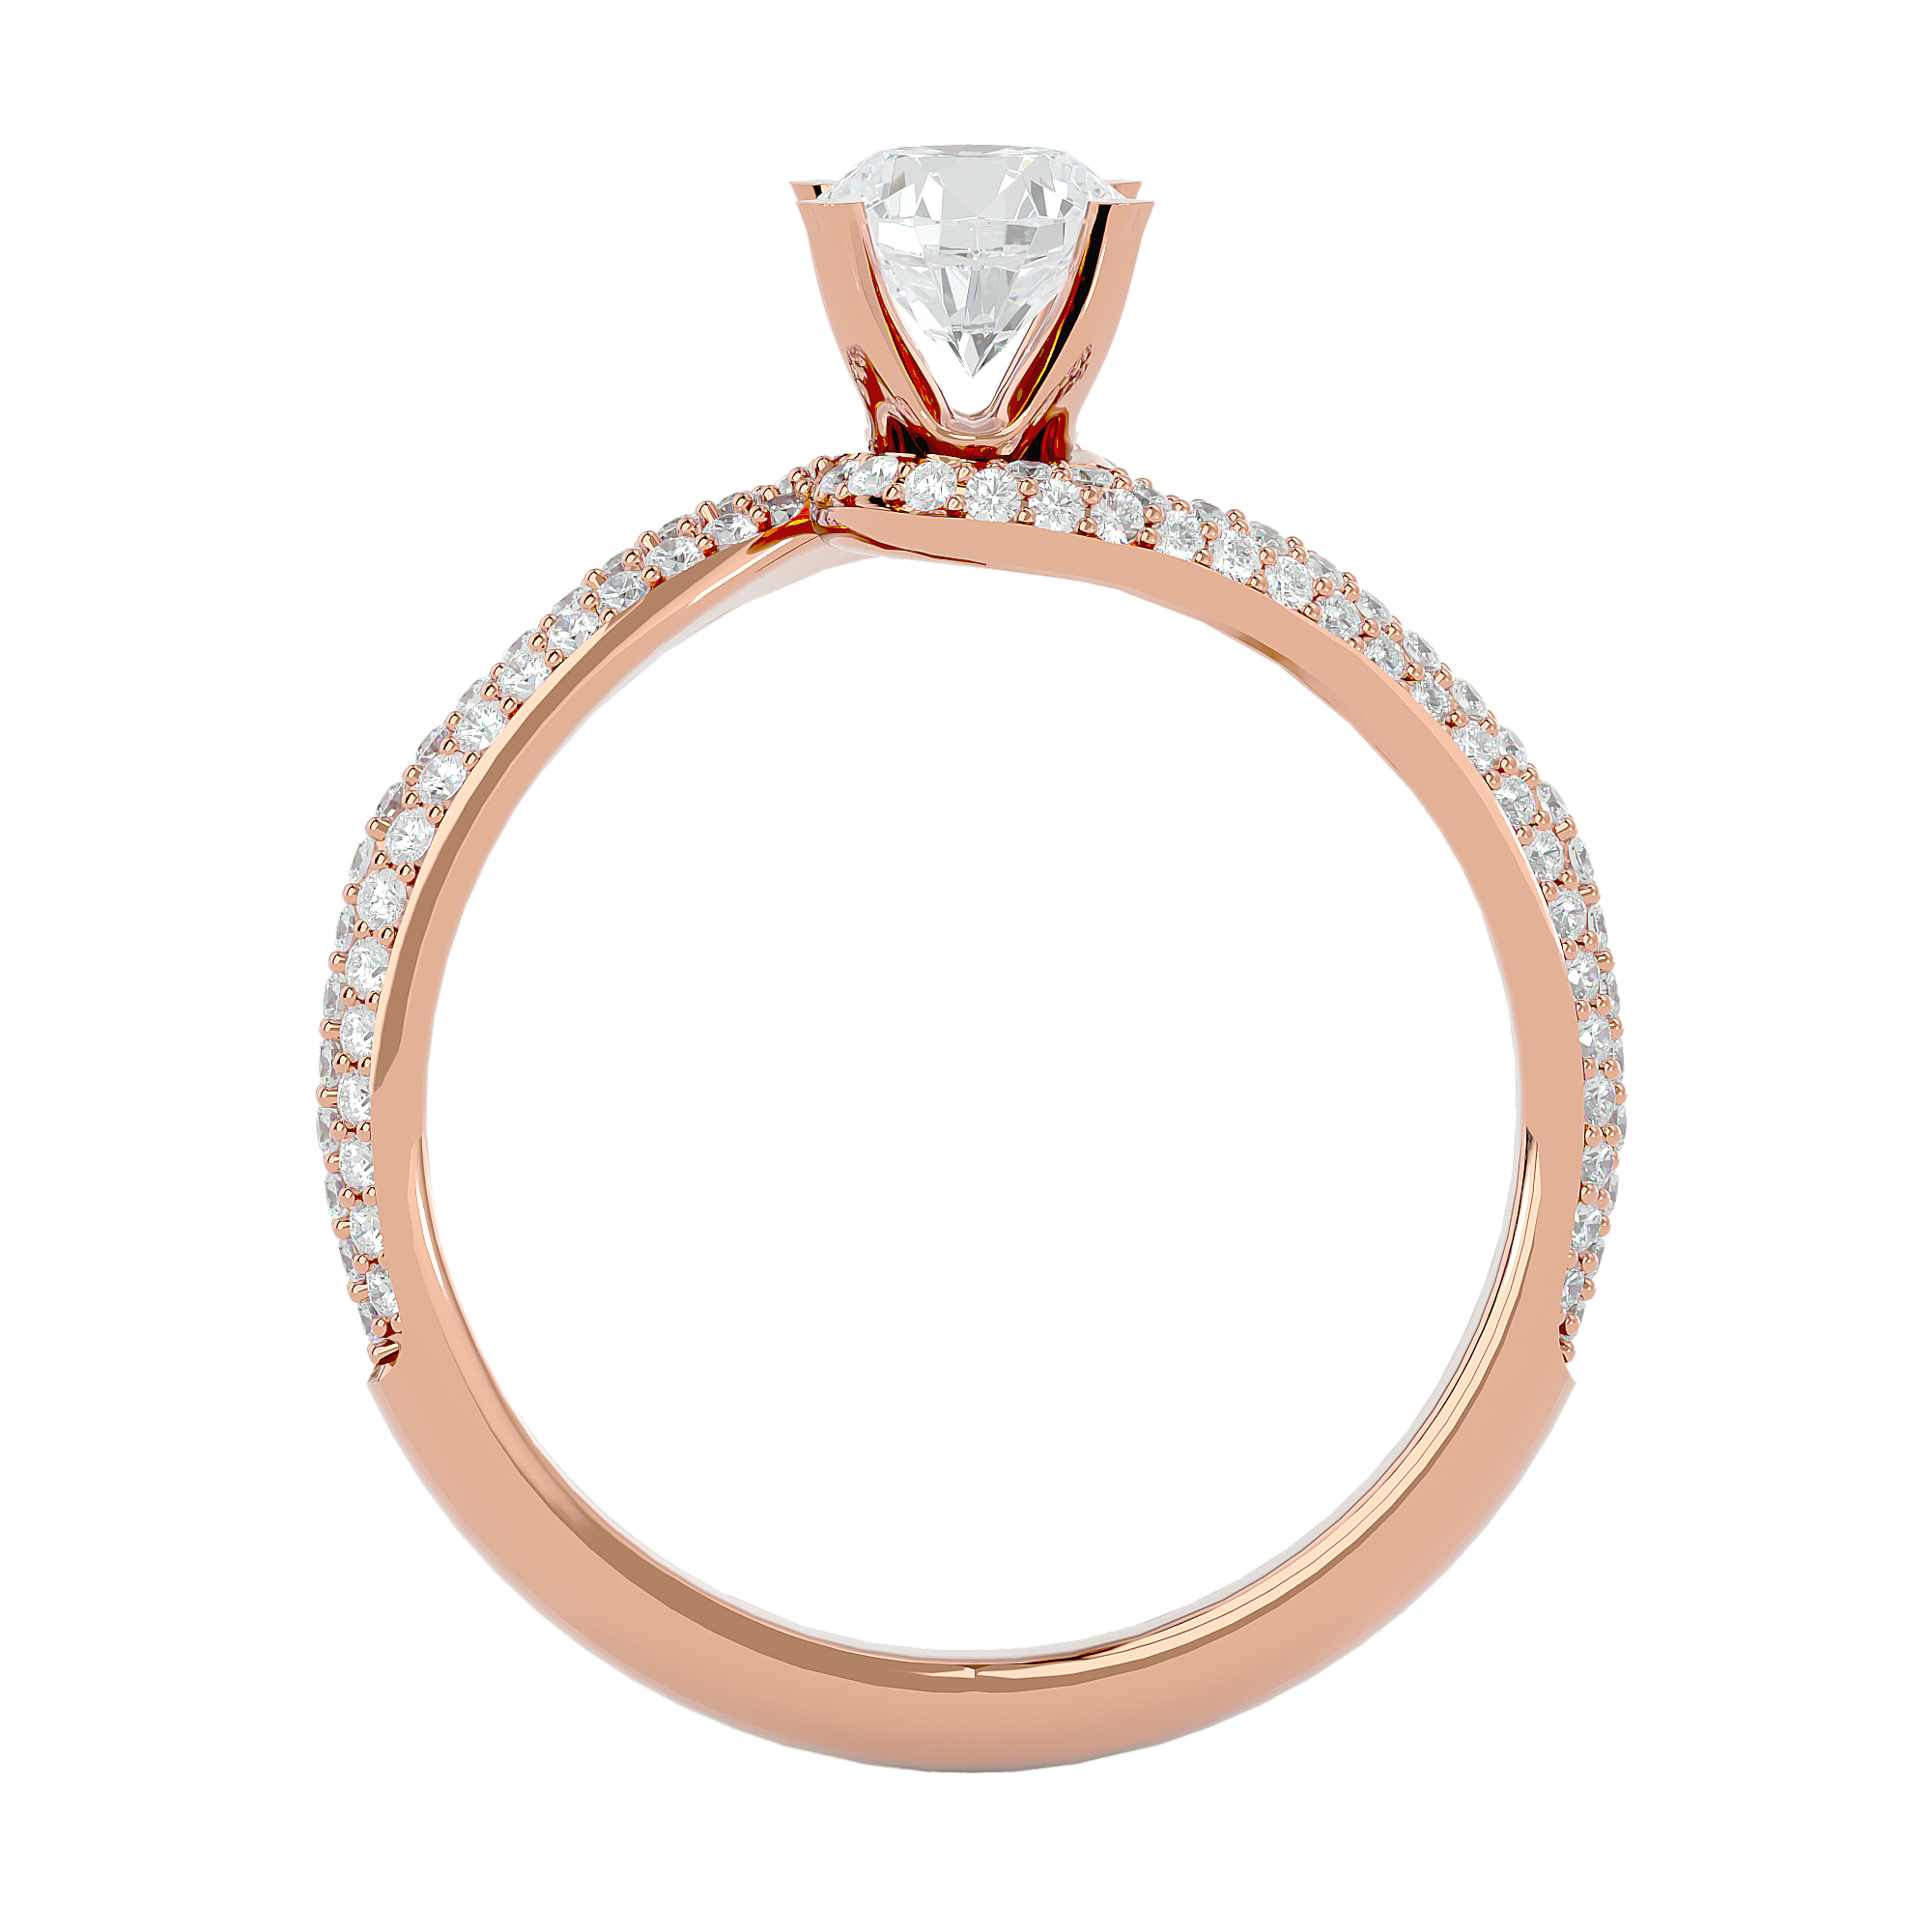 Calin Solitaire Lab Grown Diamond Ring